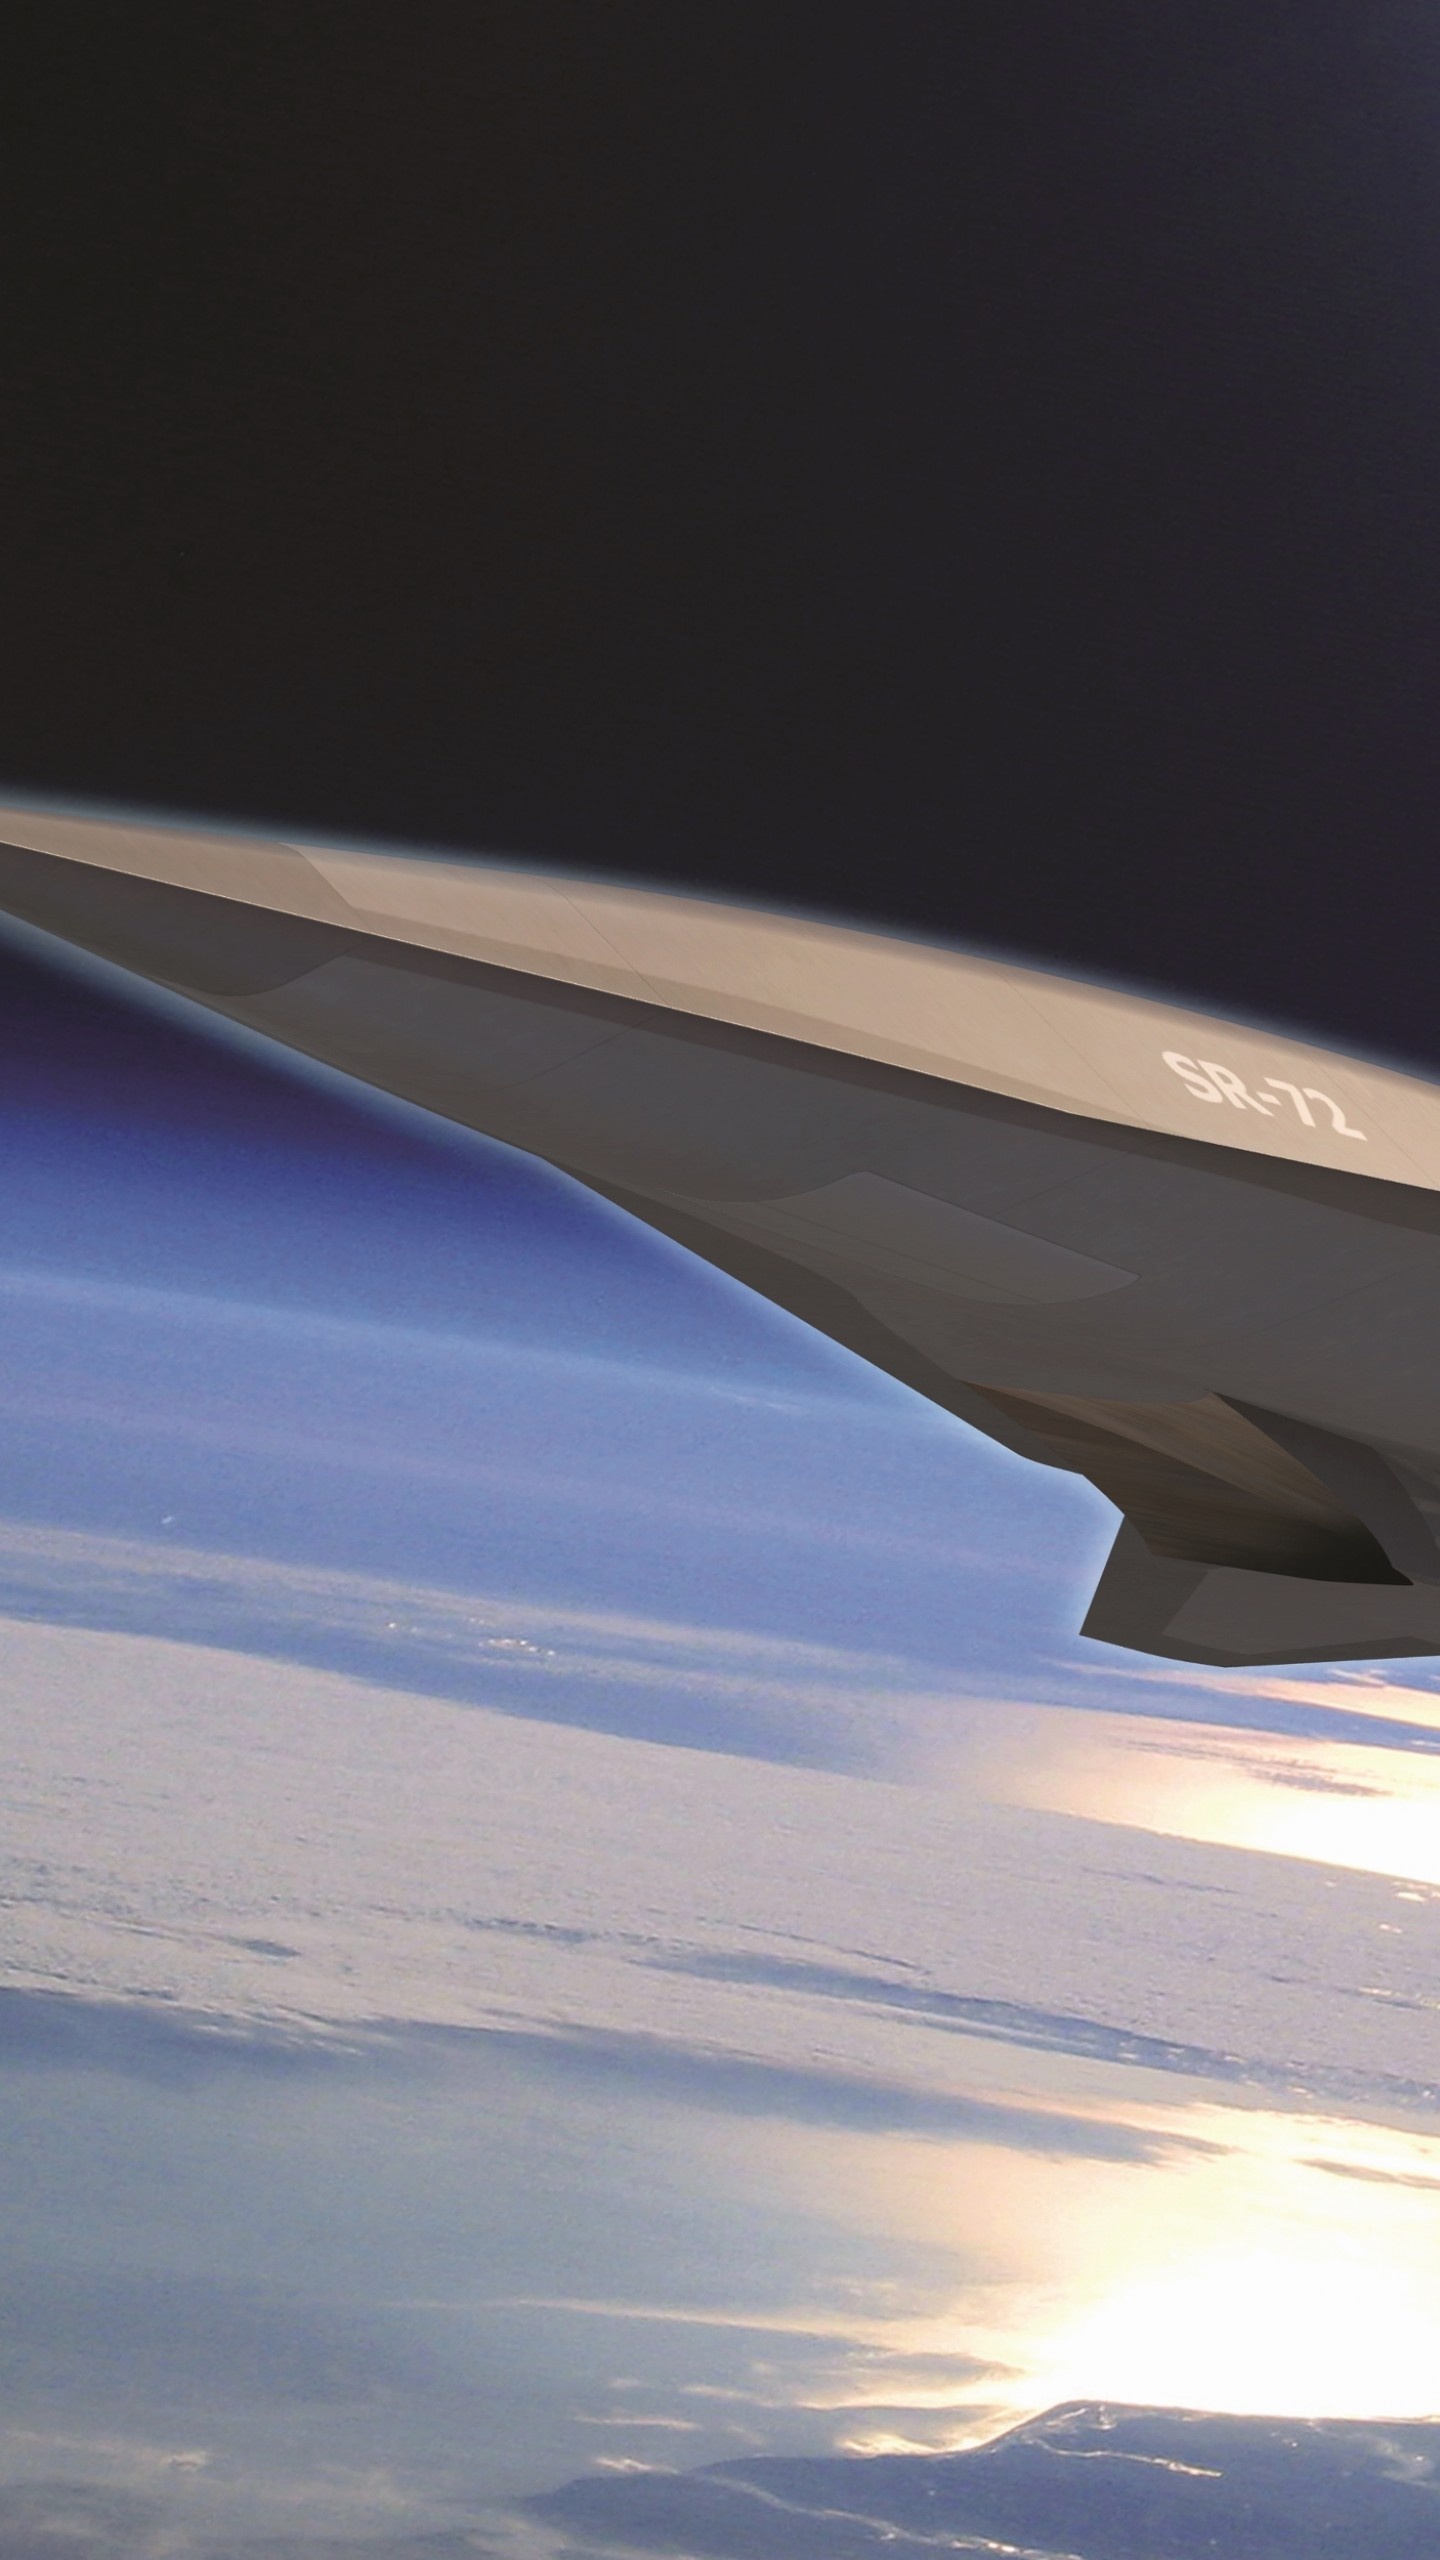 Wallpaper SR-72, Lockheed, Hypersonic Unmanned Reconnaissance Aircraft, Darpa, jet, plane, aircraft, Air Force, Military #7888 1440x2560